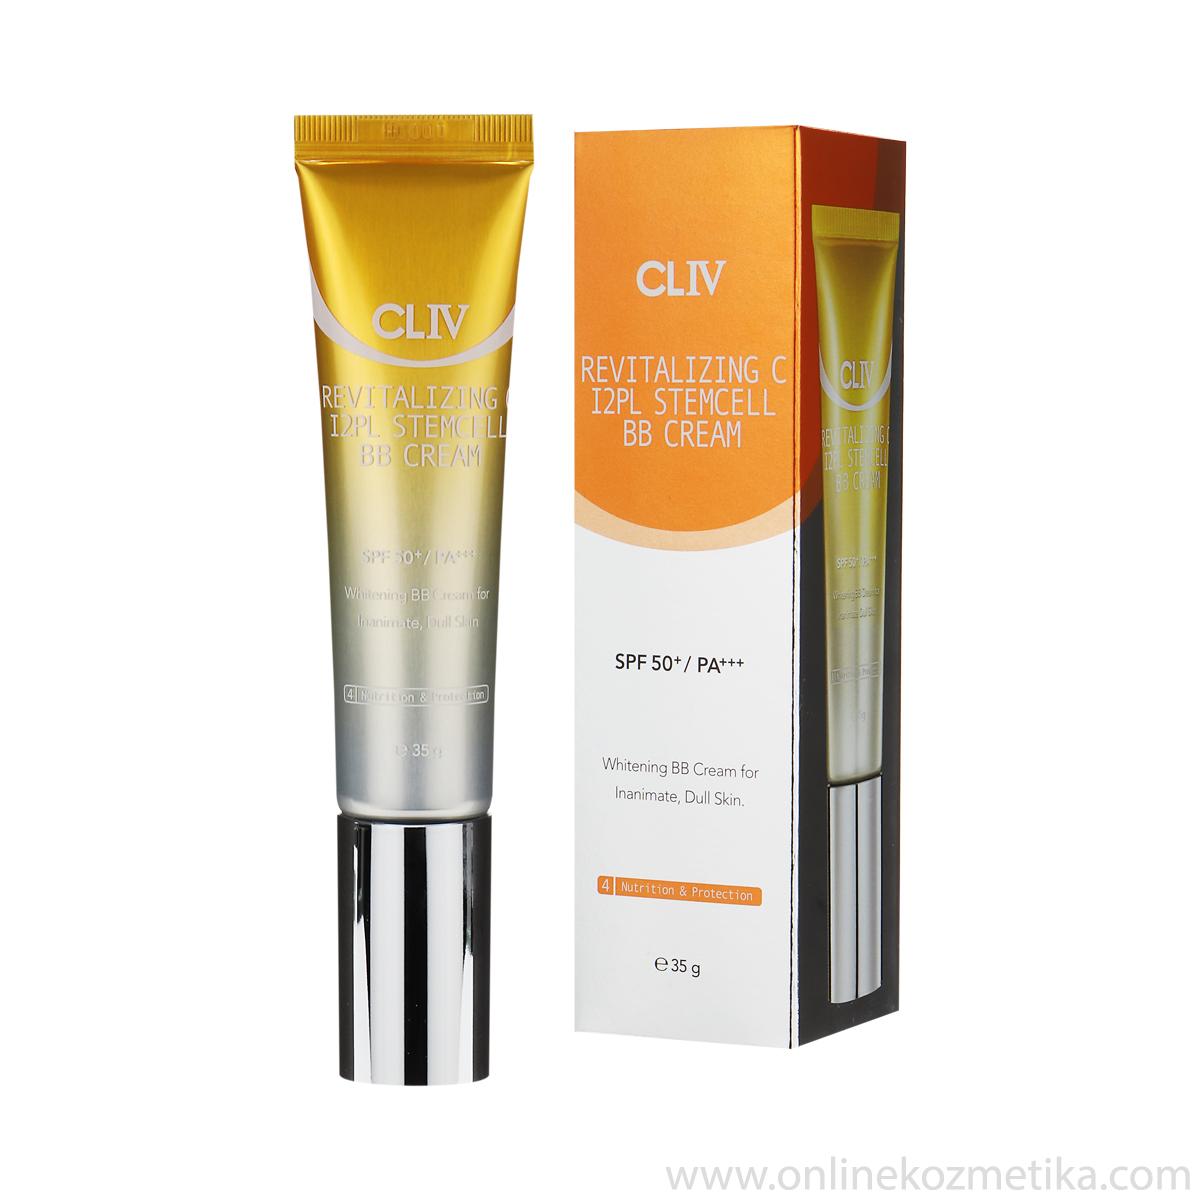 CLIV Revitalizing C 12PL Stamcell BB Cream 35gr 